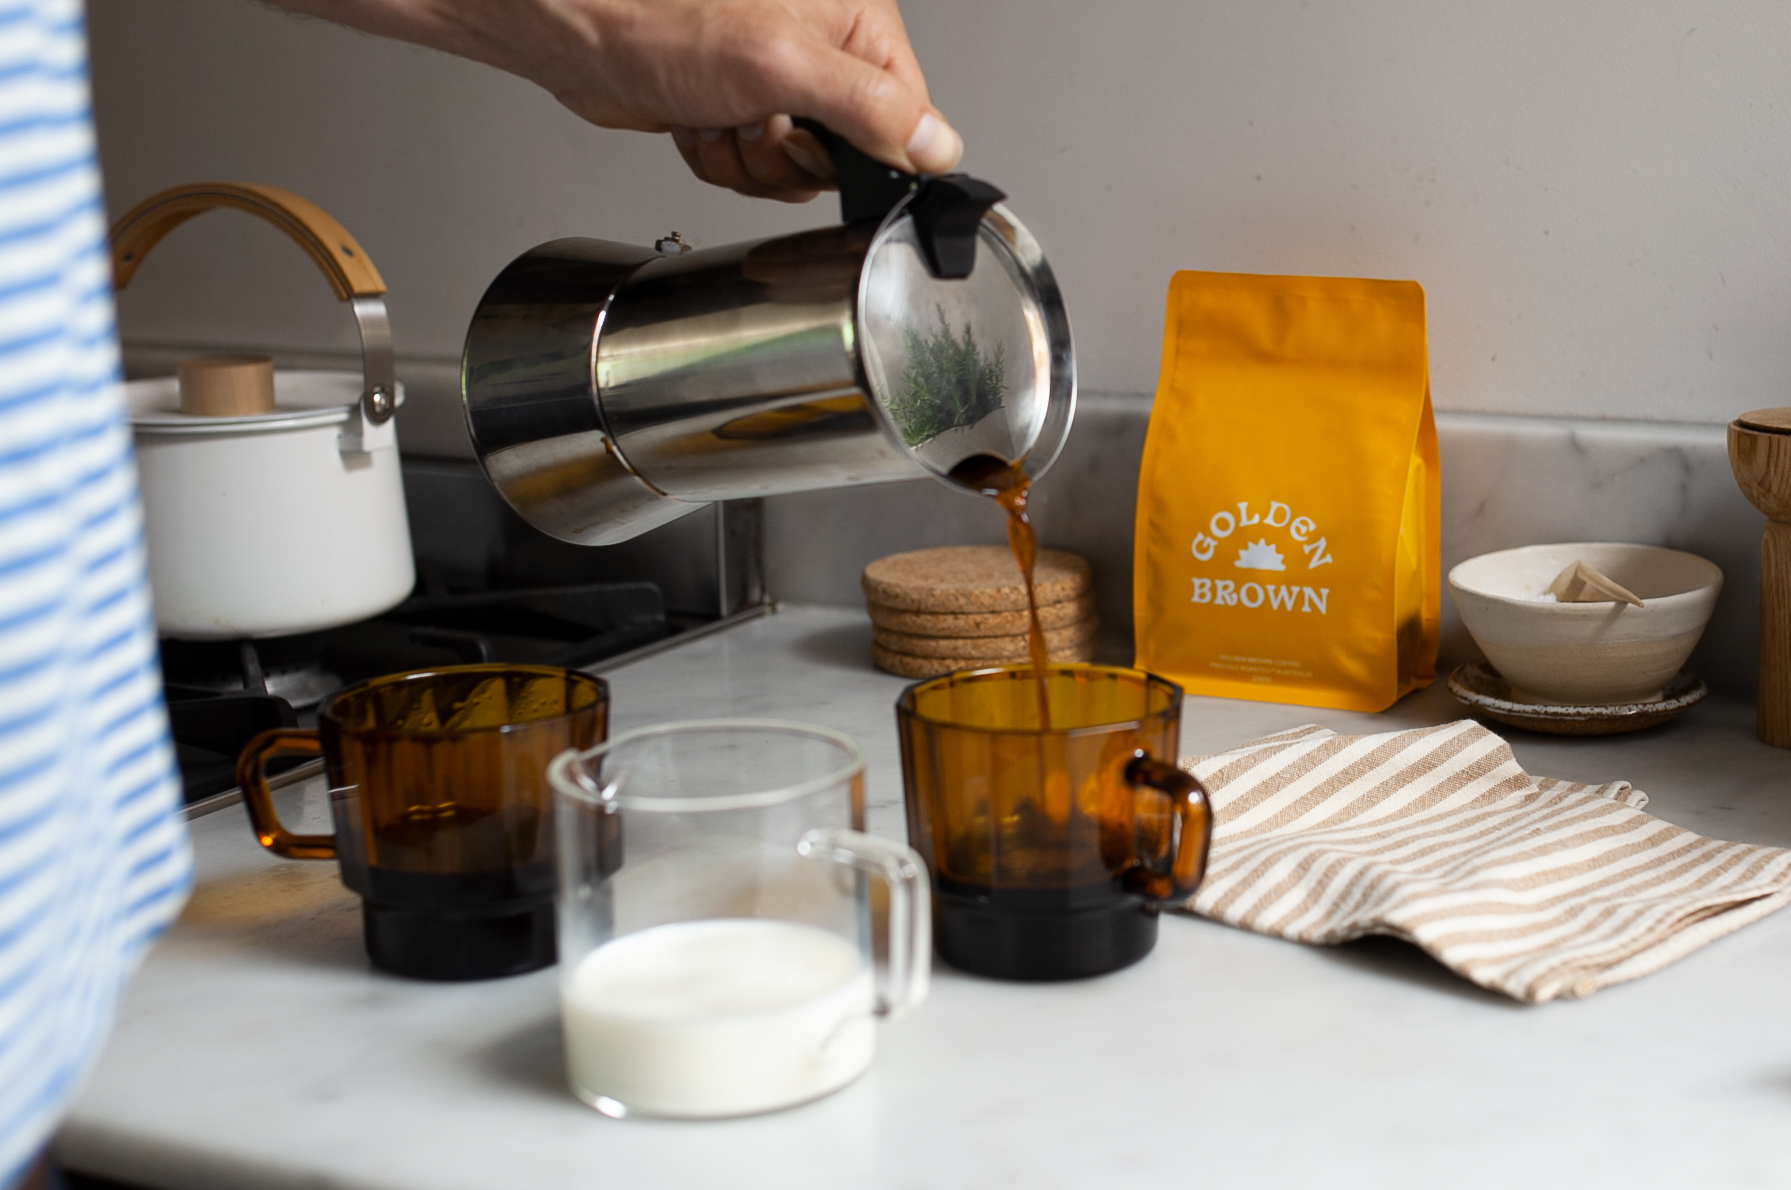 Ongoing Filter Coffee Subscription